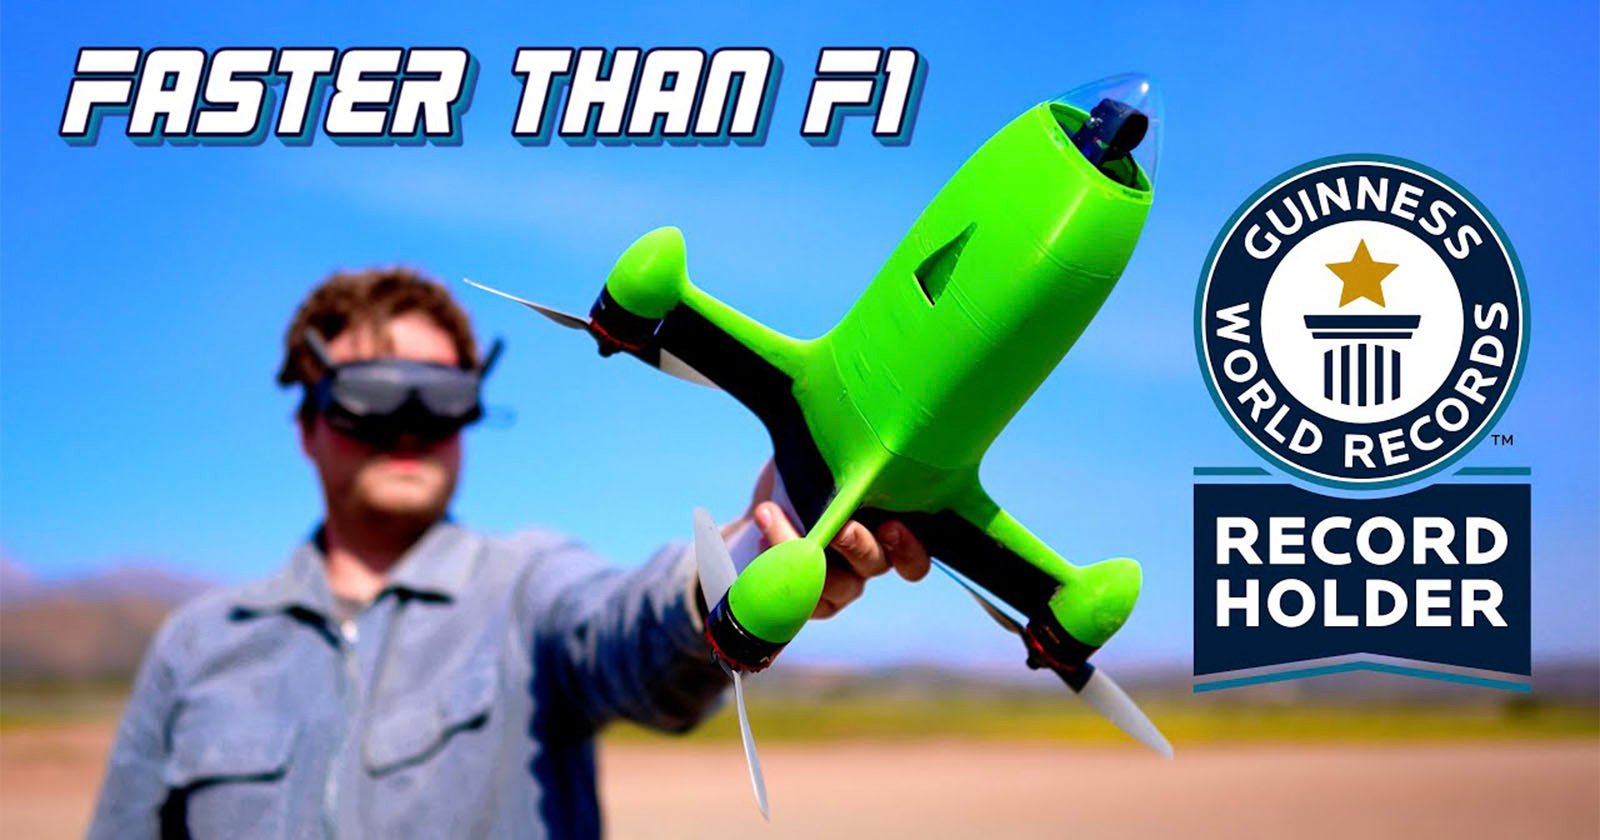 A man wearing a blindfold holds a bright green, rocket-shaped drone with "faster than f1" text, outdoors under a clear sky. "guinness world records" and "record holder" logos are displayed.